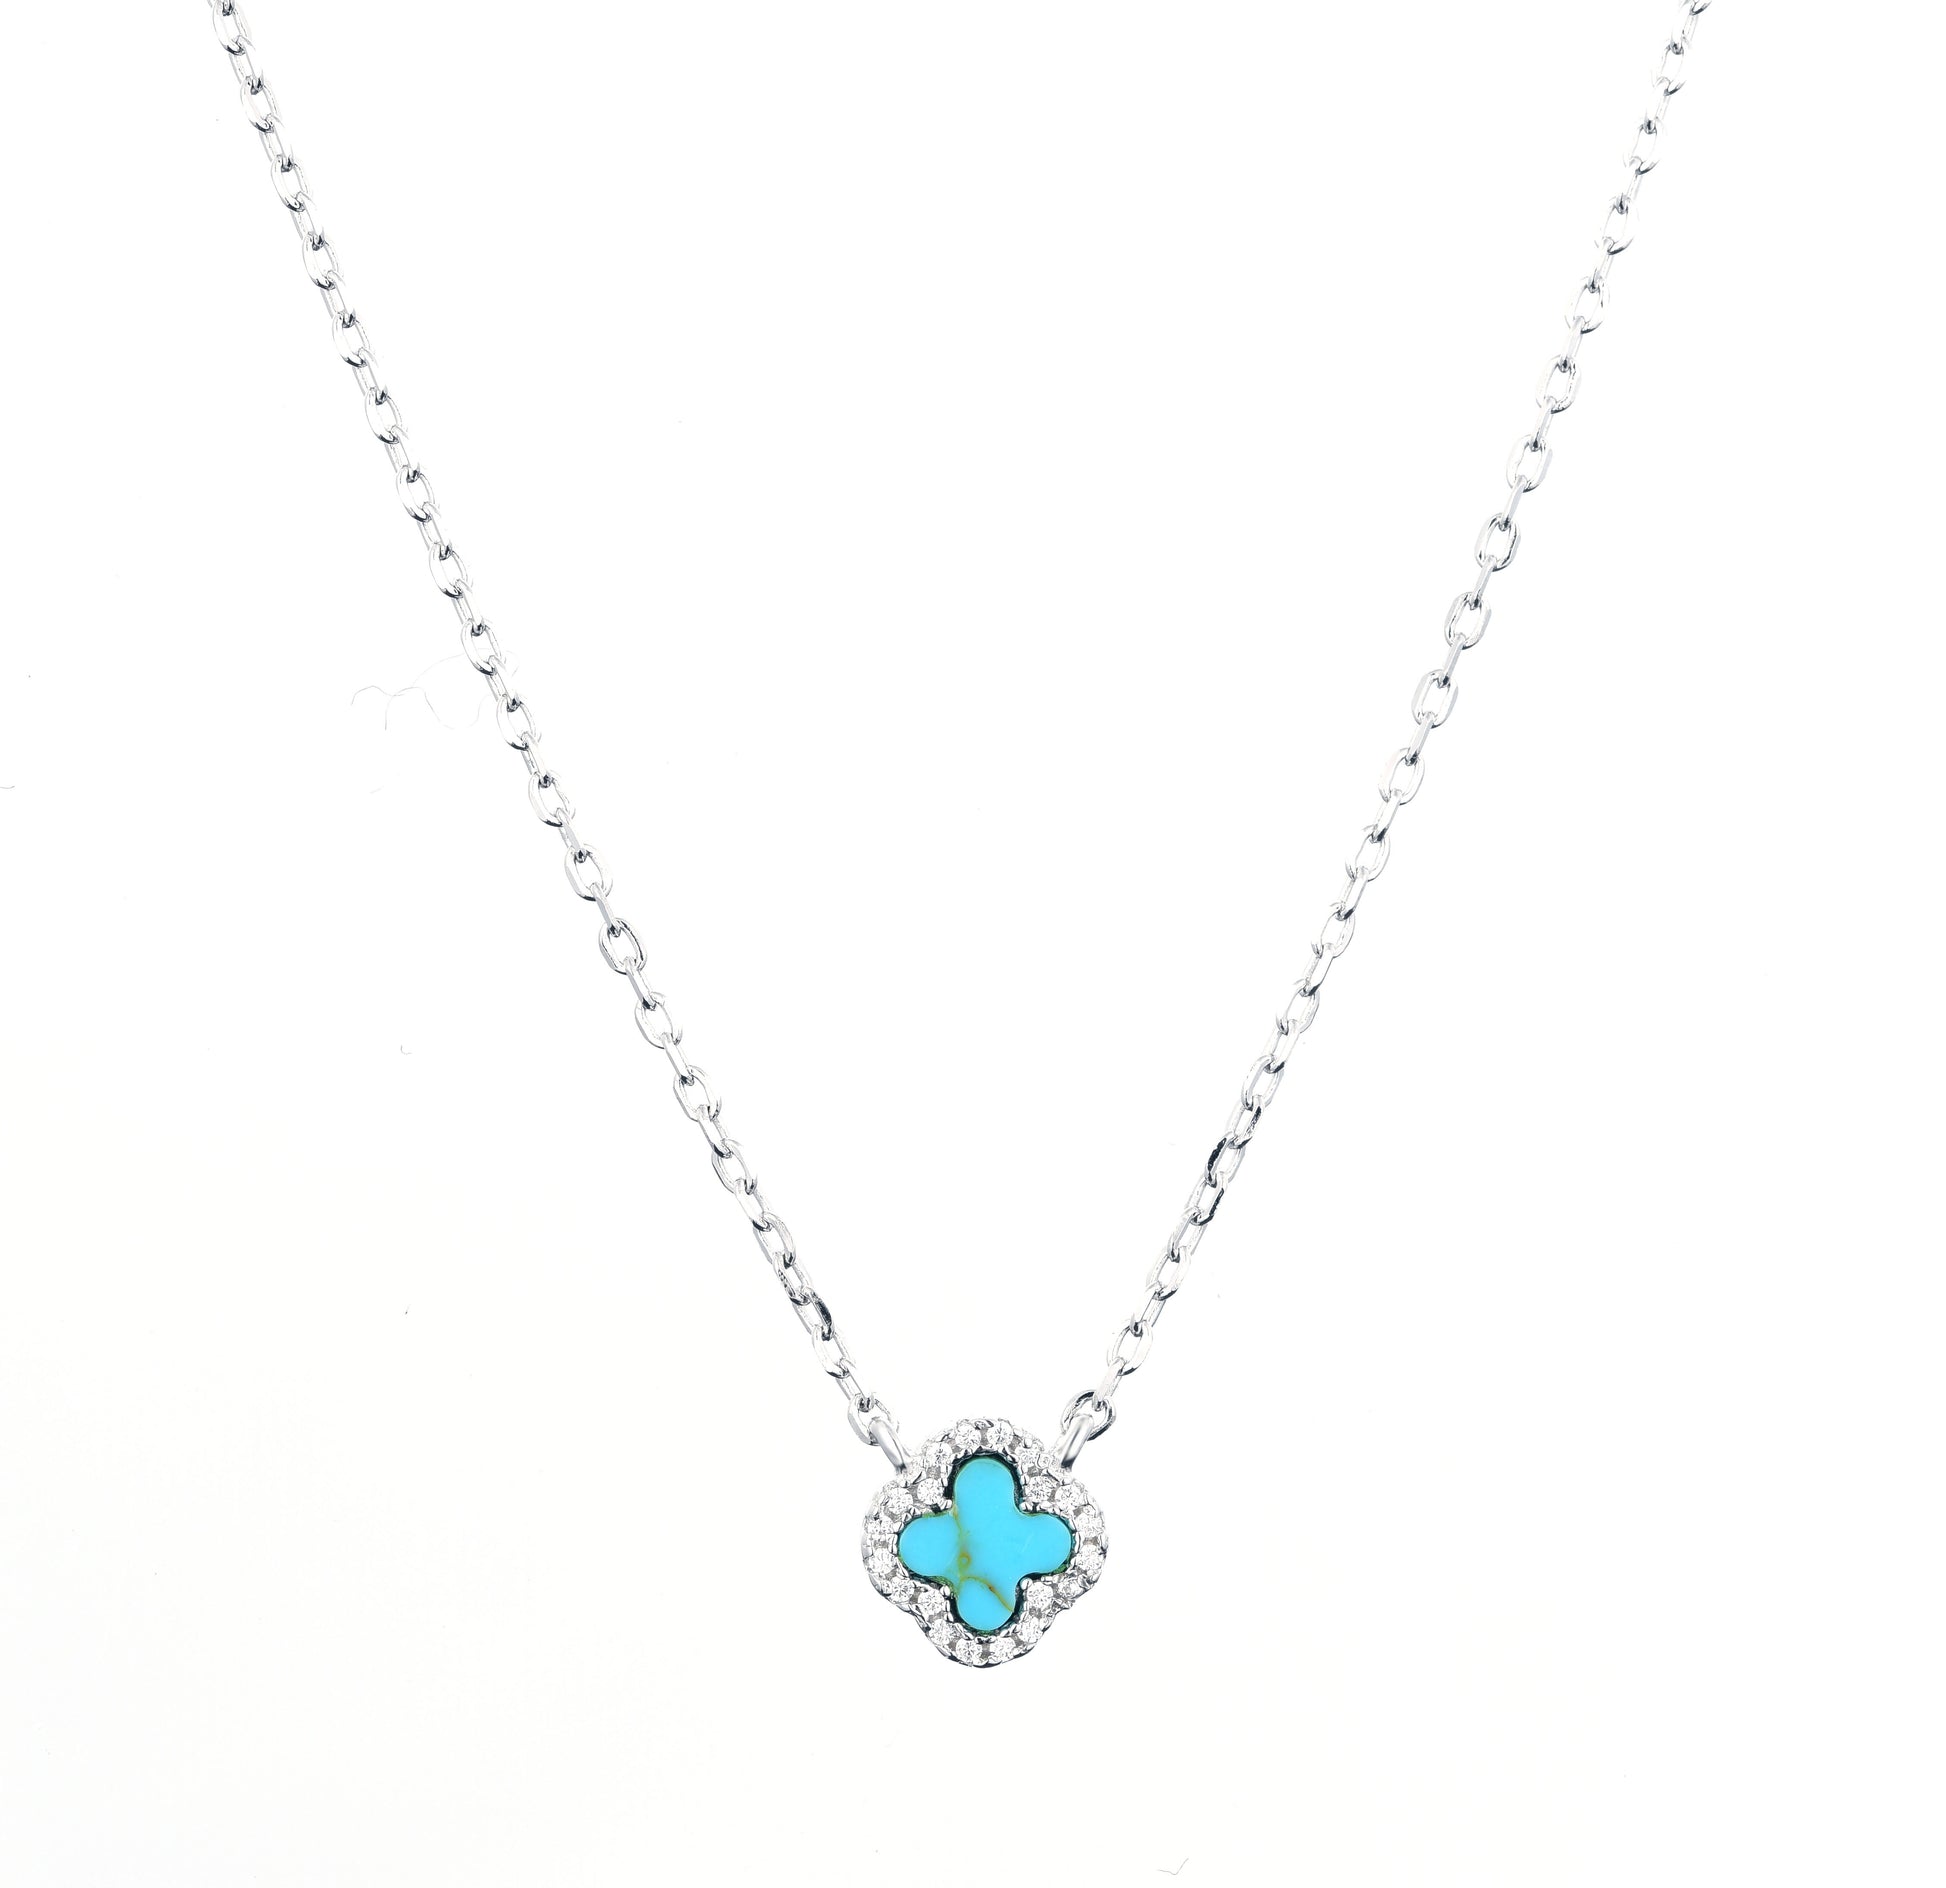 Mini clover turquoise necklace 